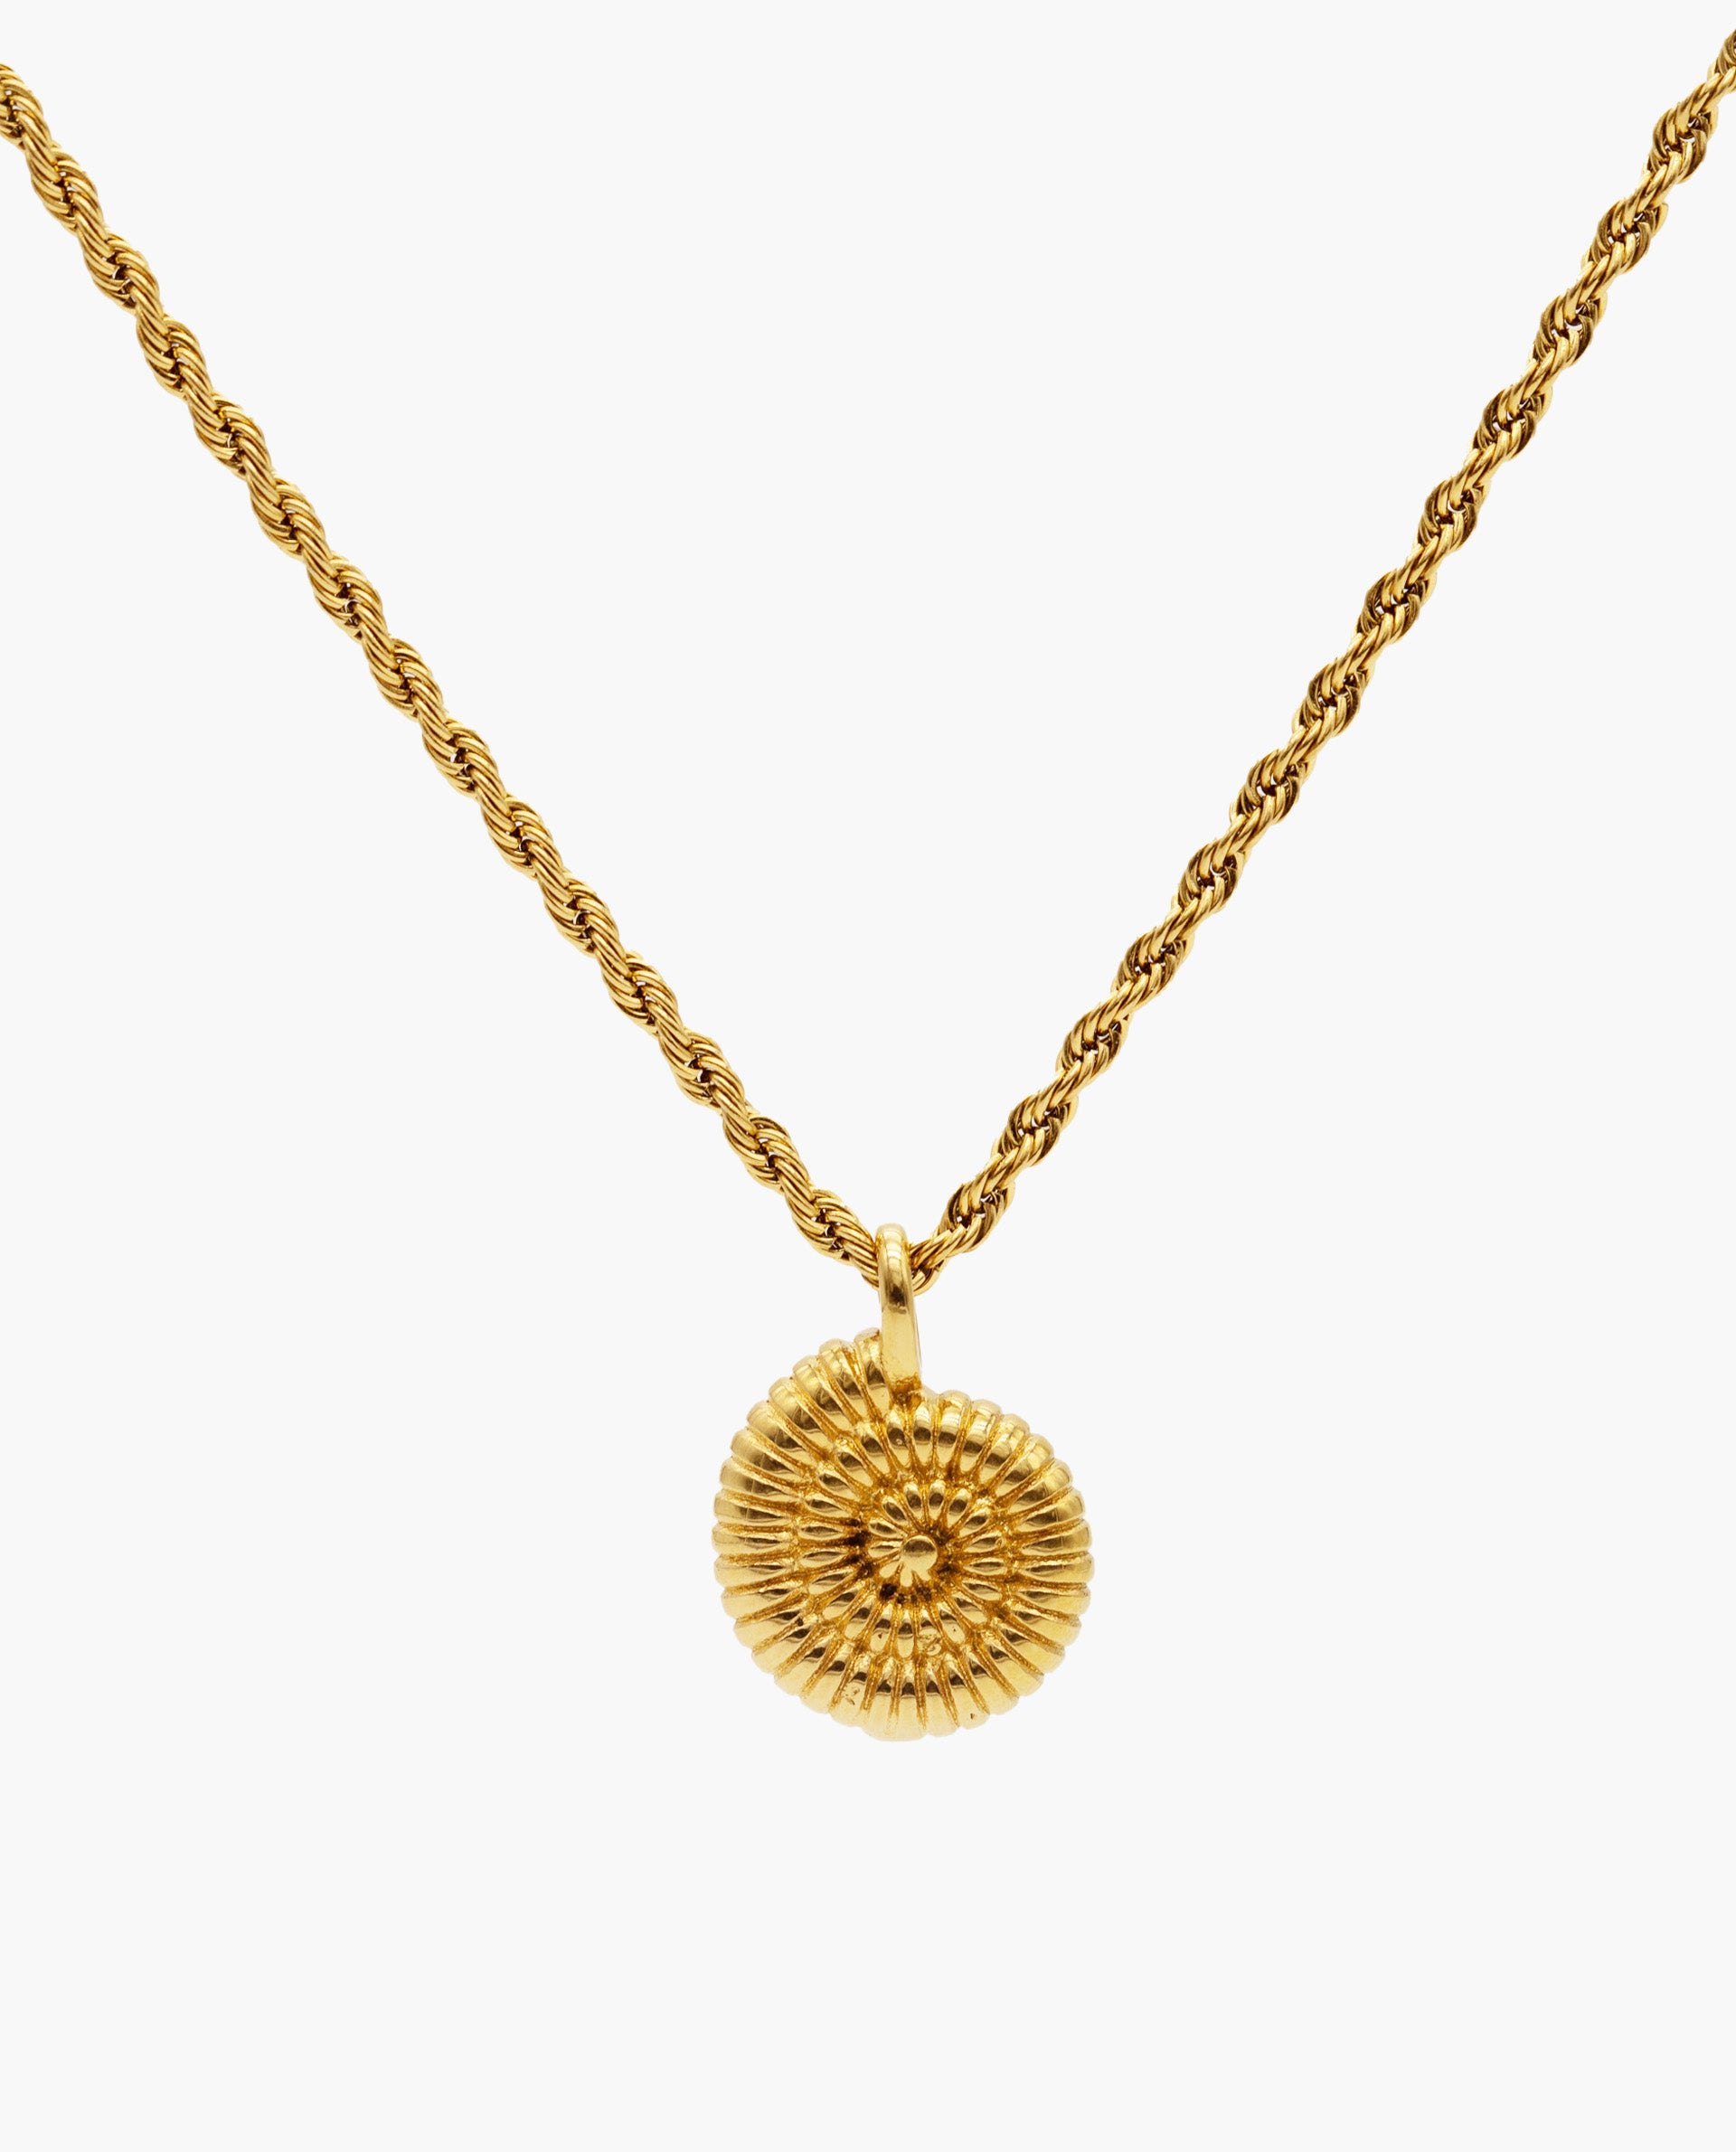 SUN SHELL NECKLACE - GOLD PLATED STEEL